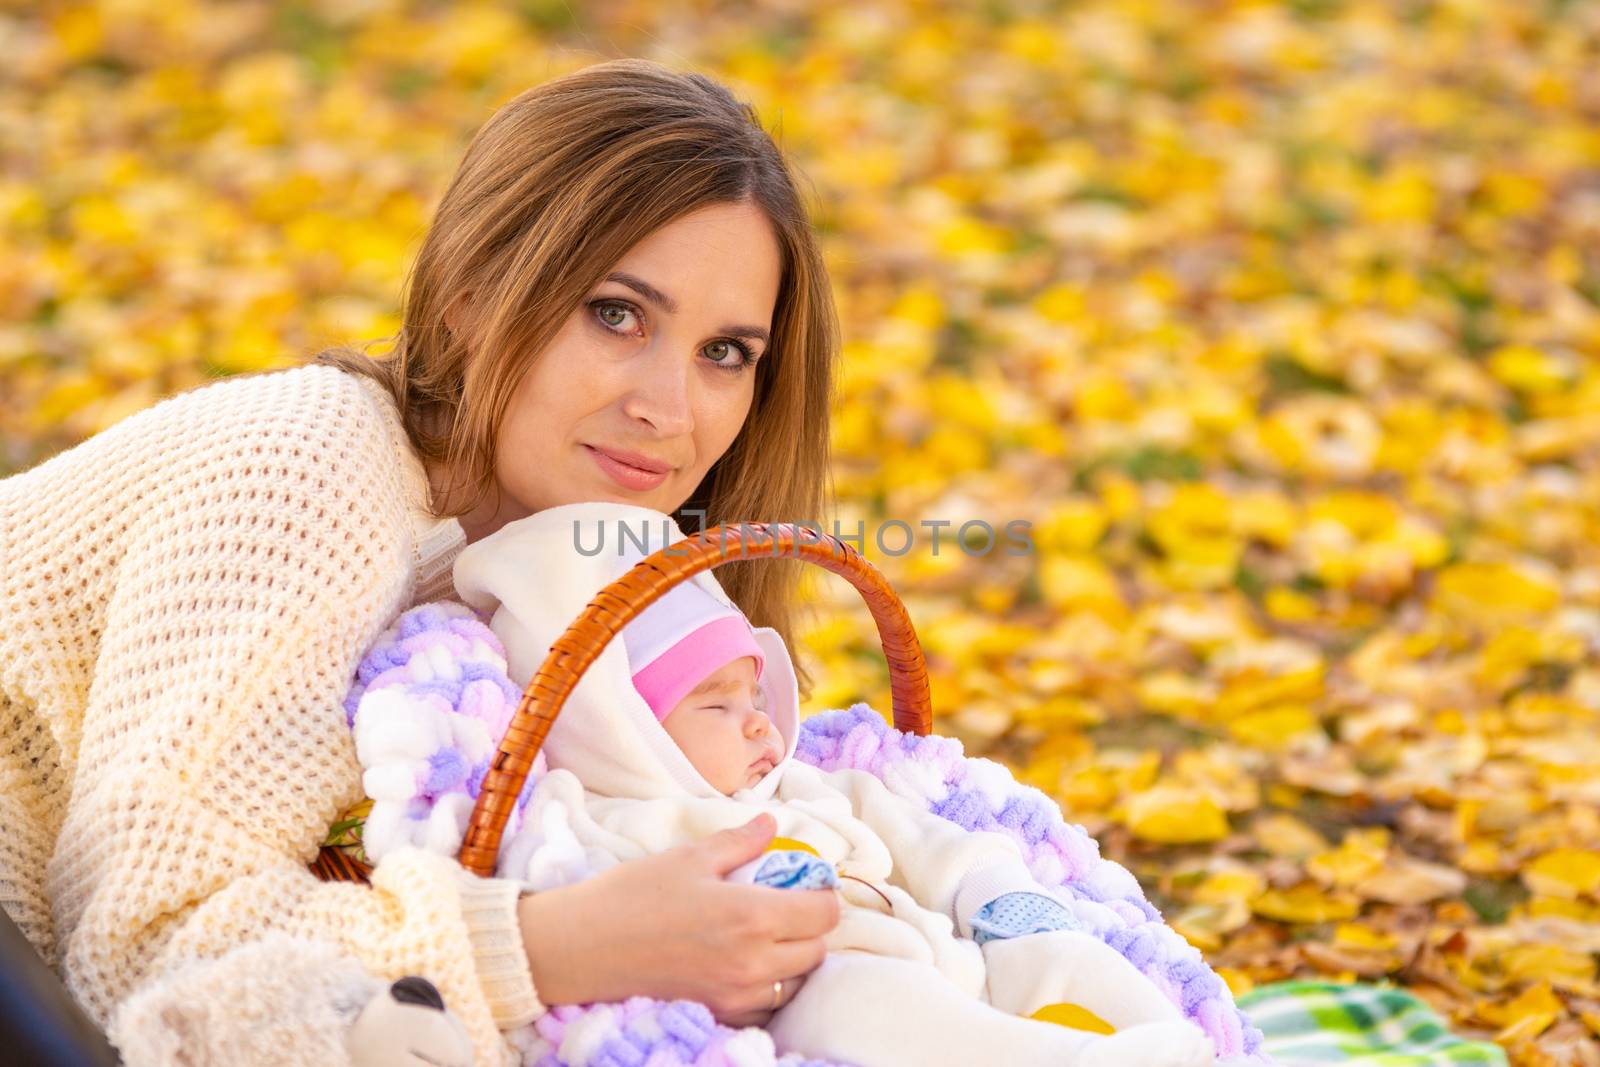 Mom and baby sleeping in basket against the background of yellow fallen foliage in the park